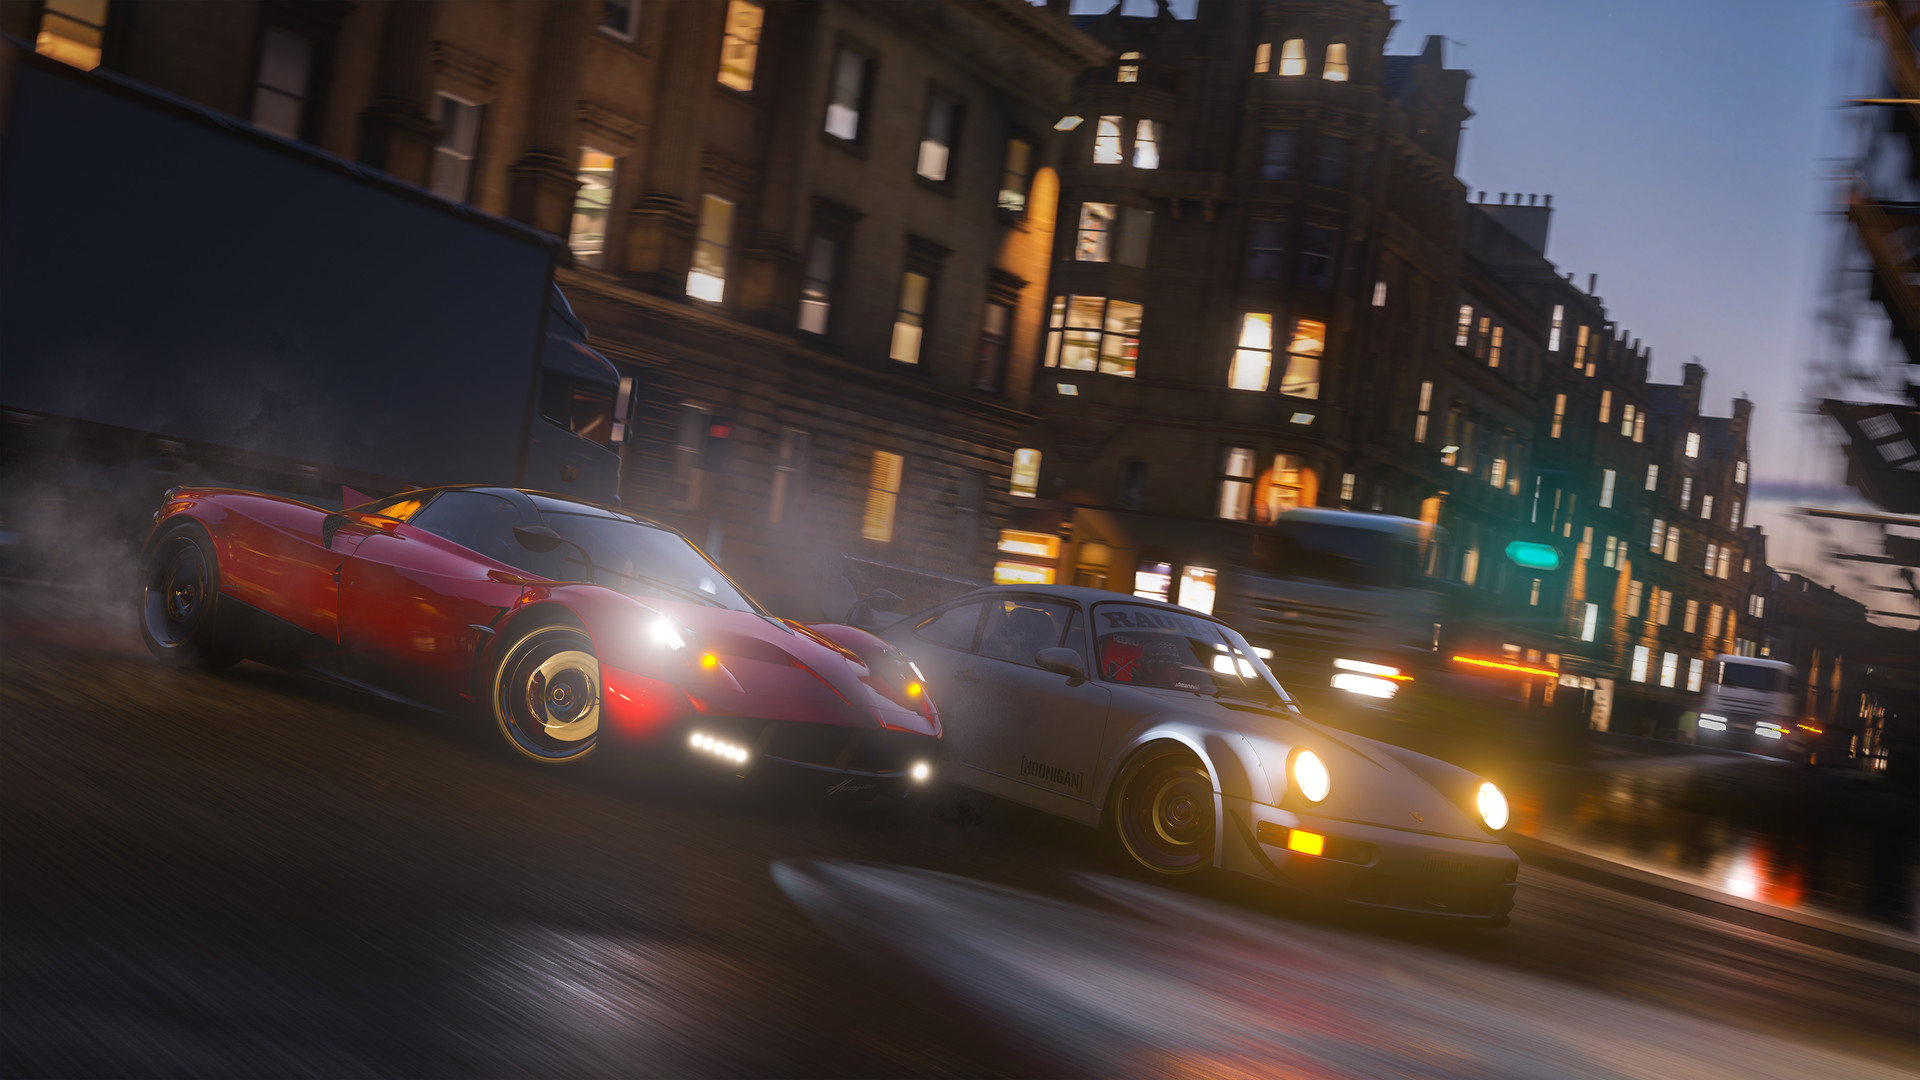 Forza Horizon 4 is coming to Steam 